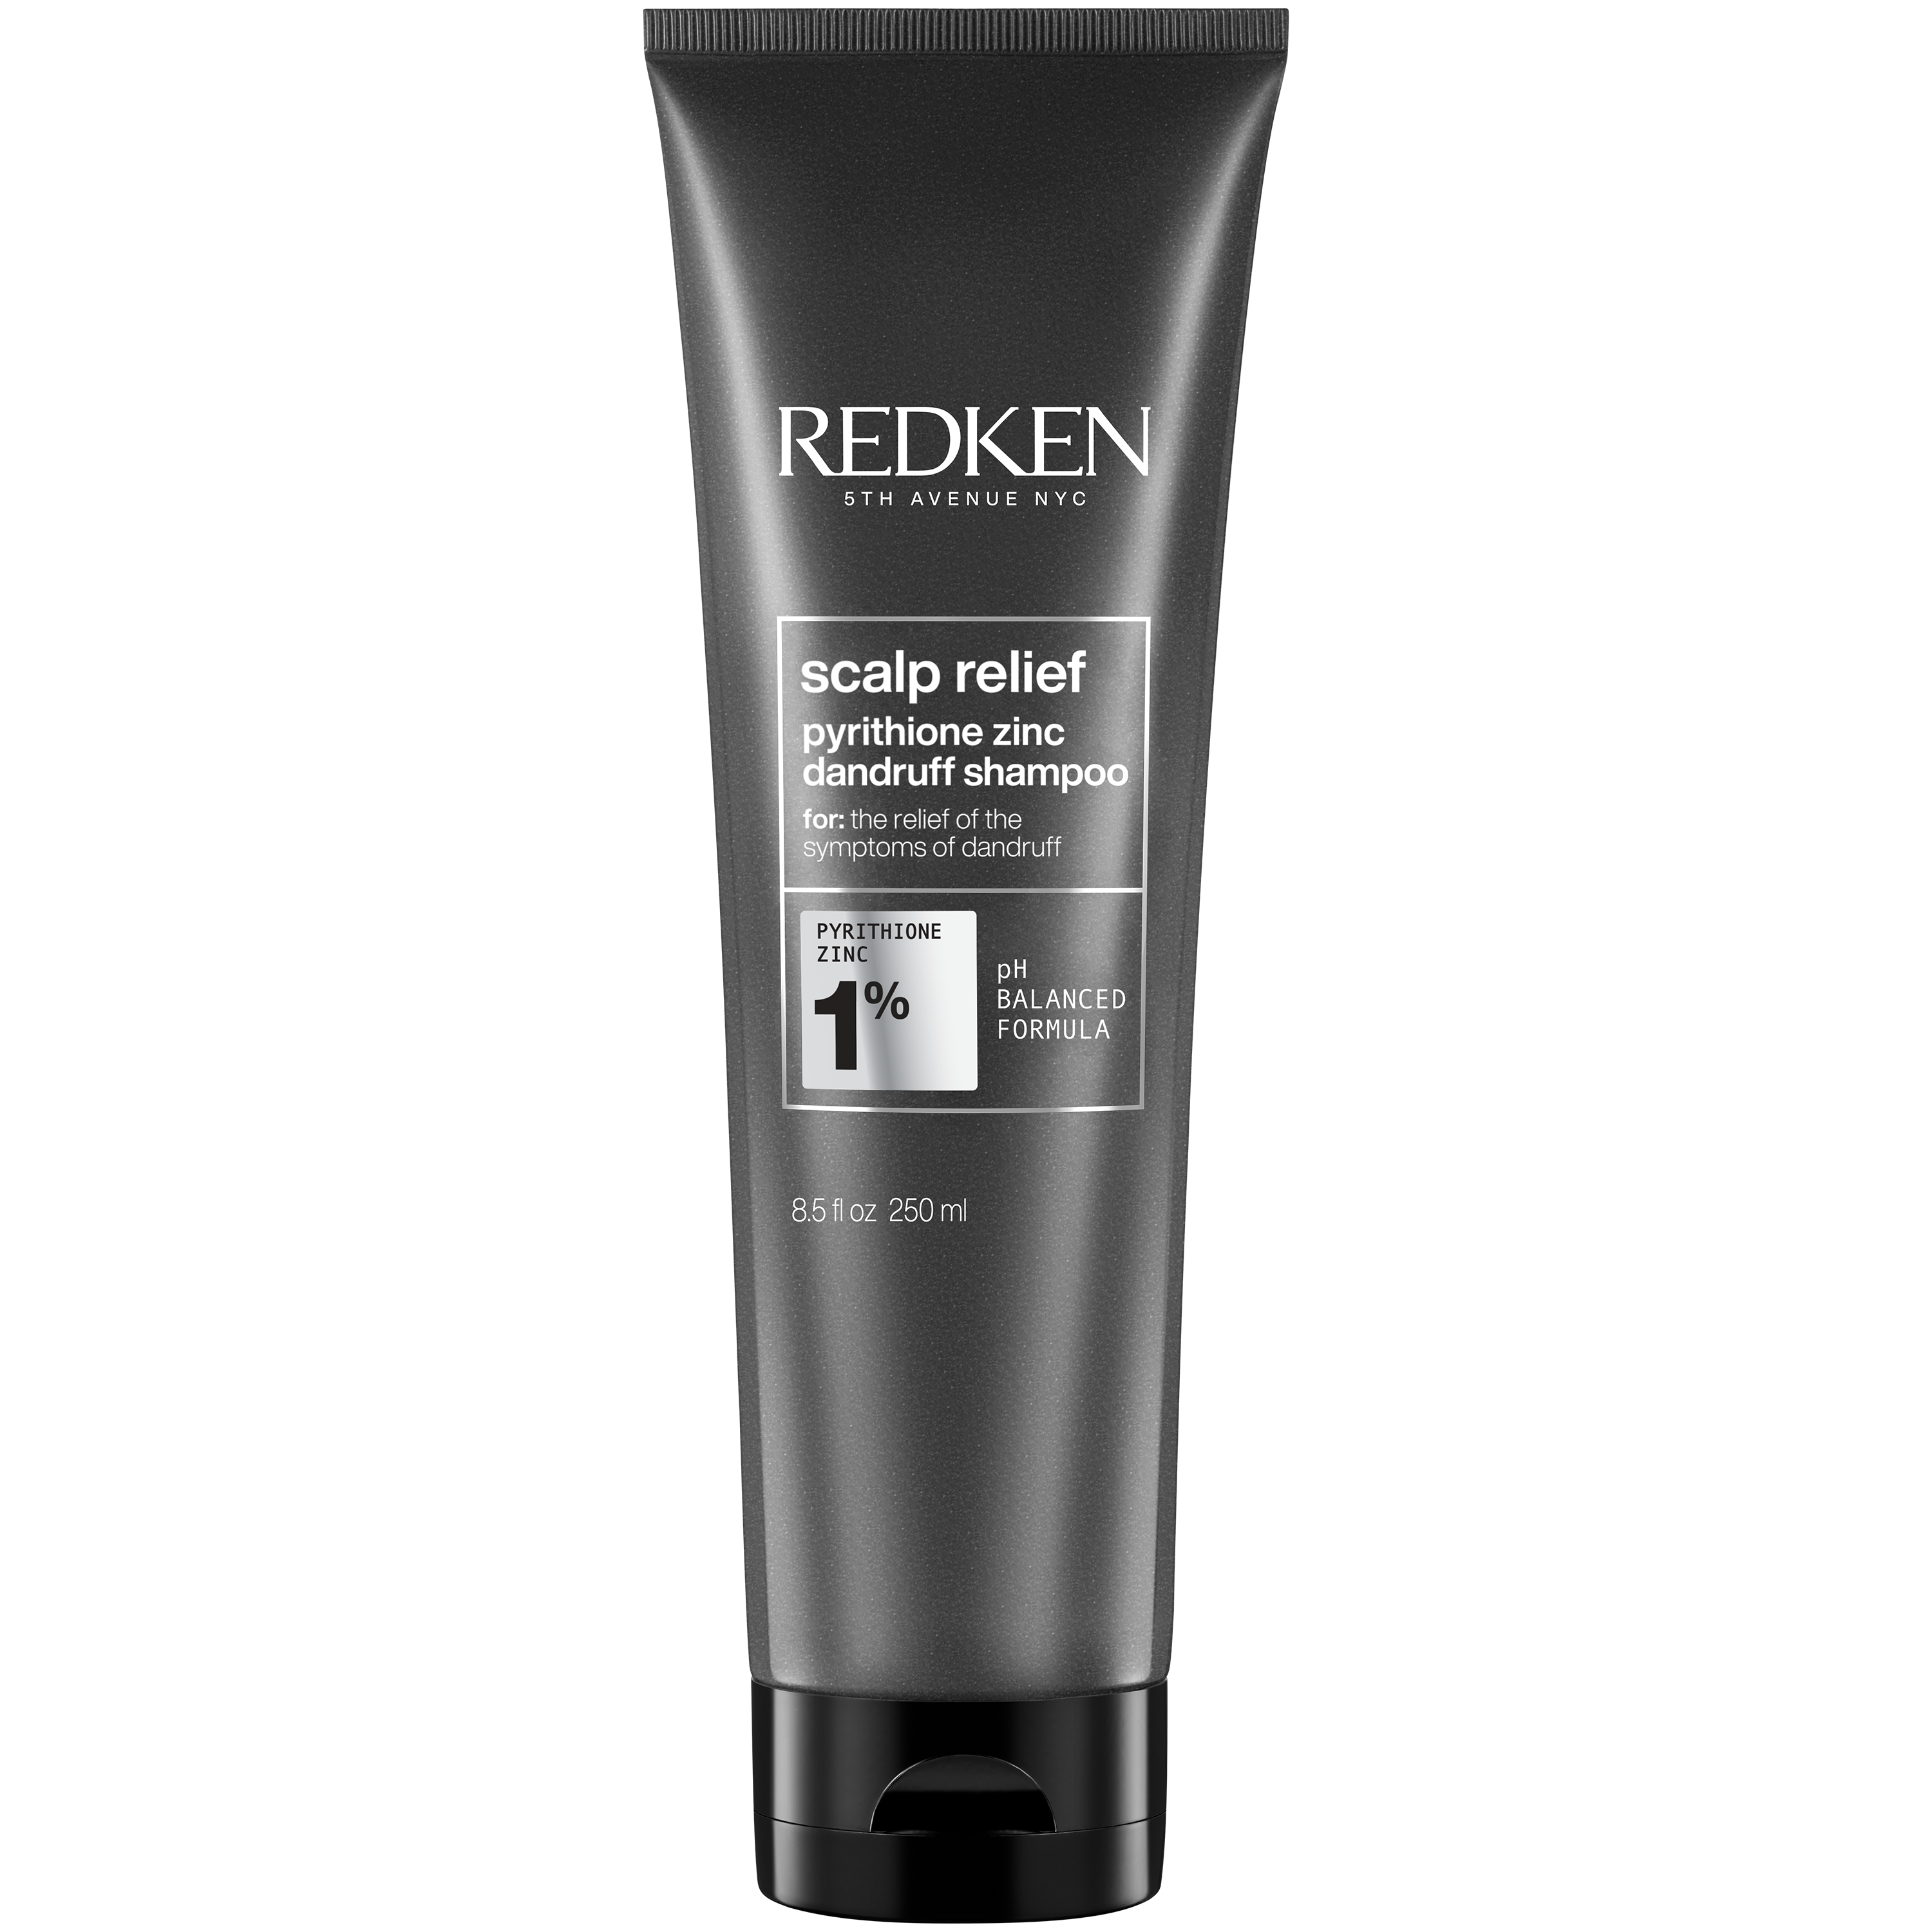 Redken-2020-NA-Scalp-Relief-Product-Shot-3000×3000